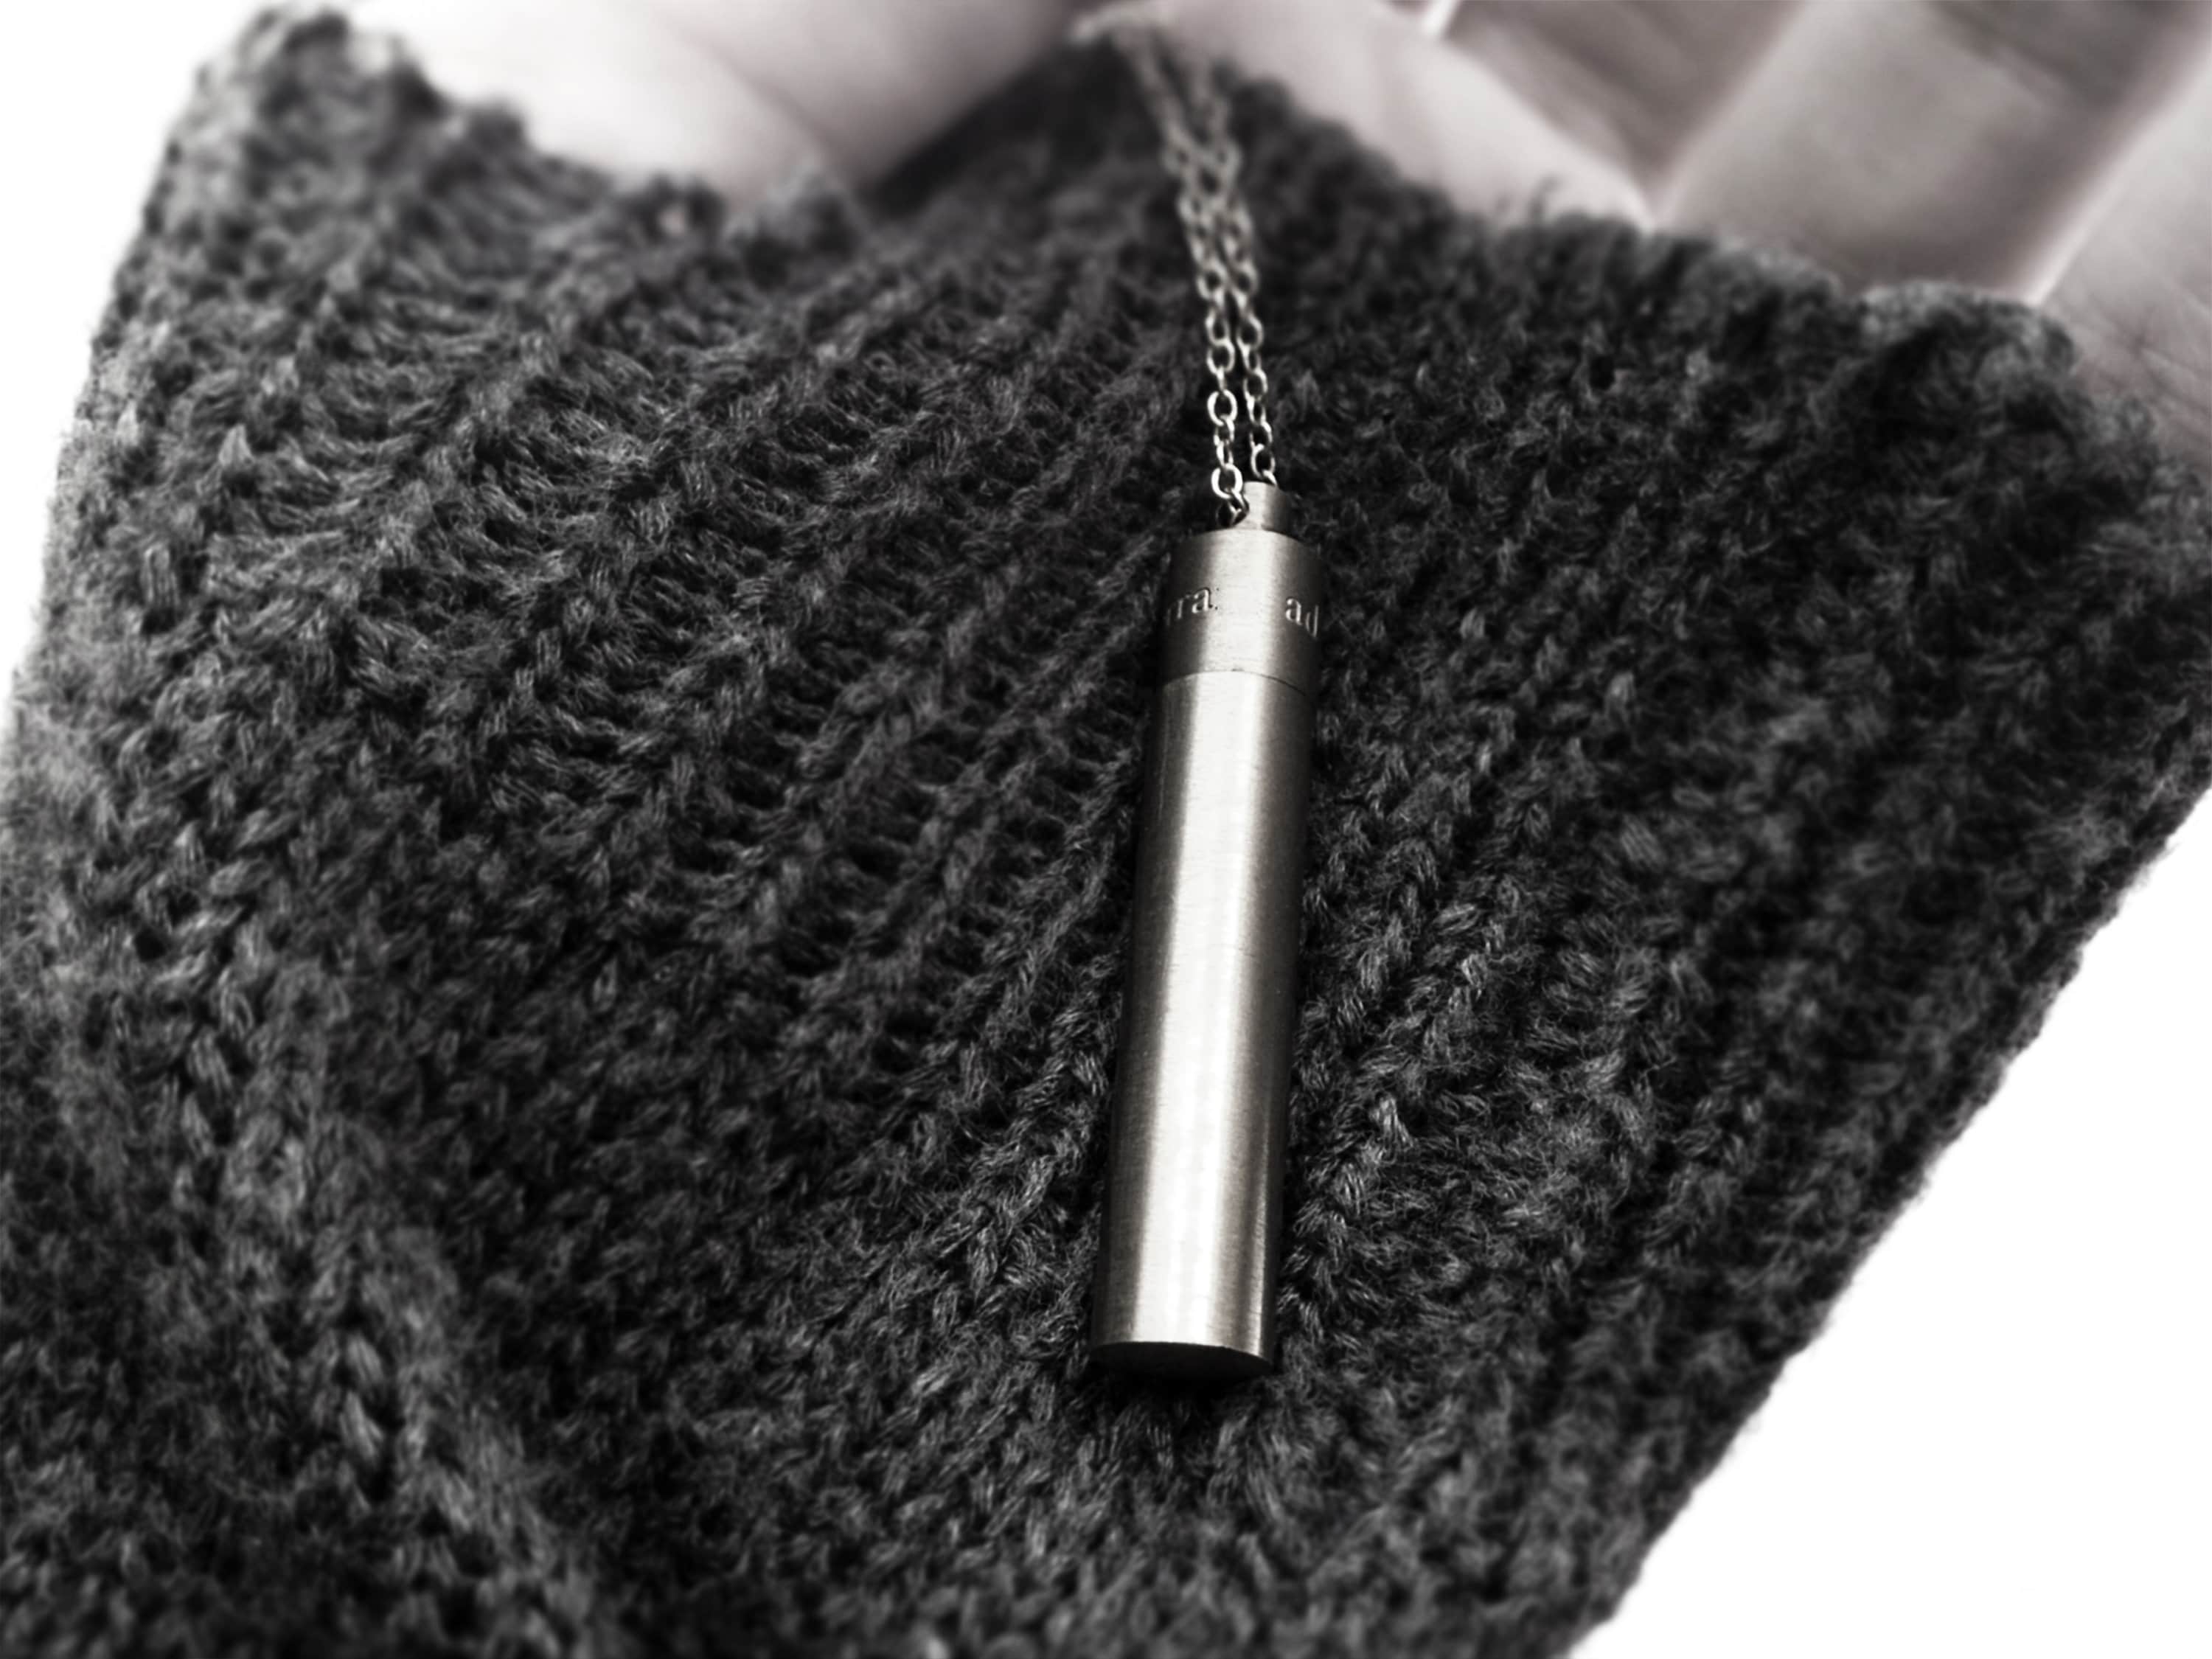 Meteorite Fragment Capsule Necklace - Stainless Steel Space / Astronomy Container Pendant with Glass Vial - EDC Locket Jewelry Gift